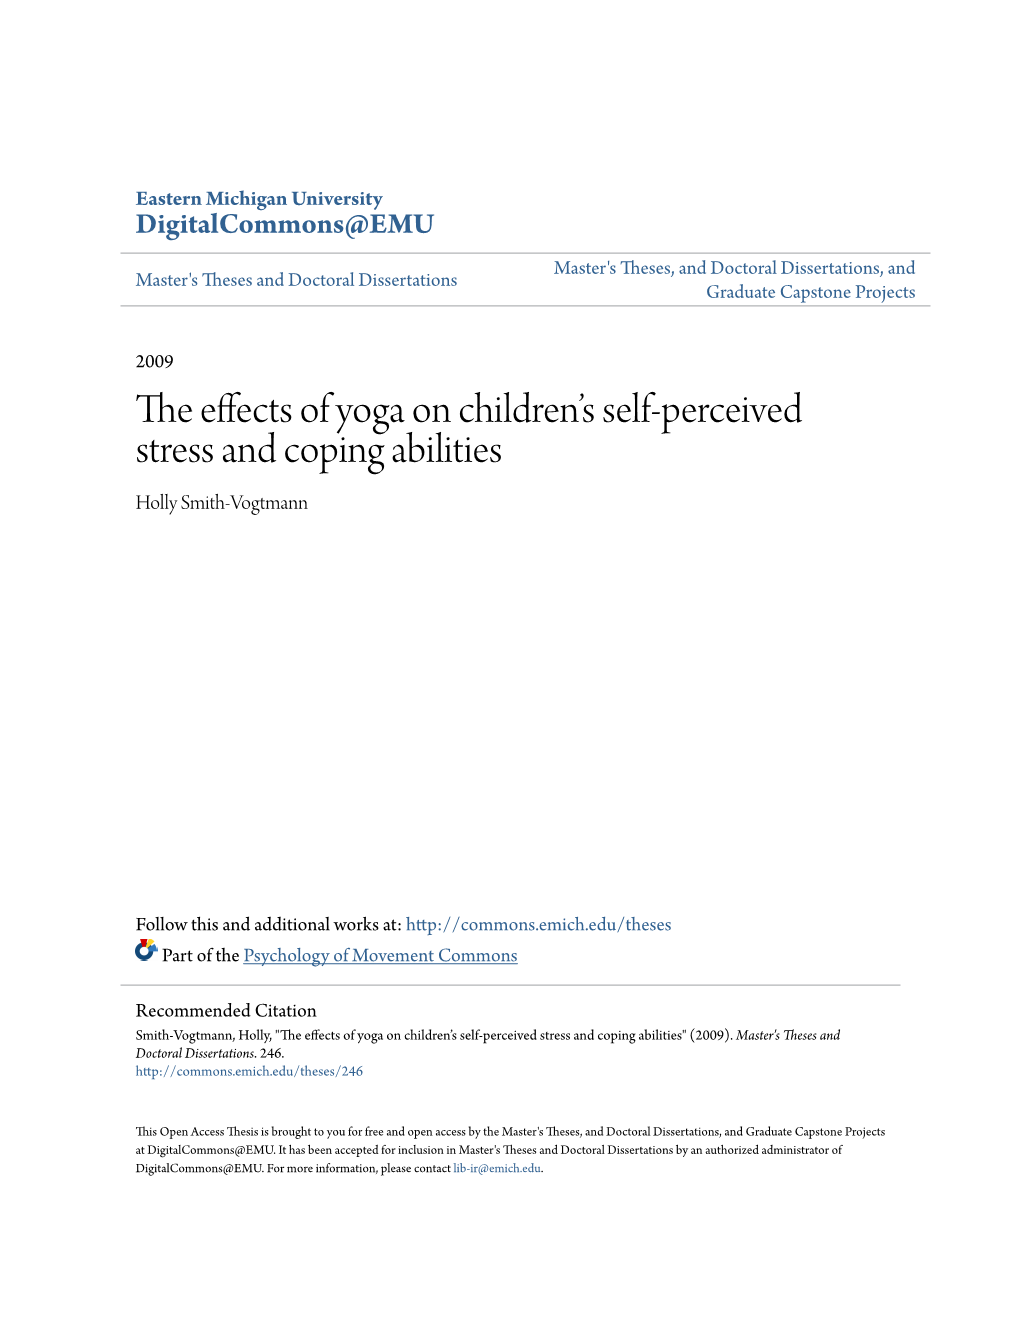 The Effects of Yoga on Children's Self-Perceived Stress and Coping